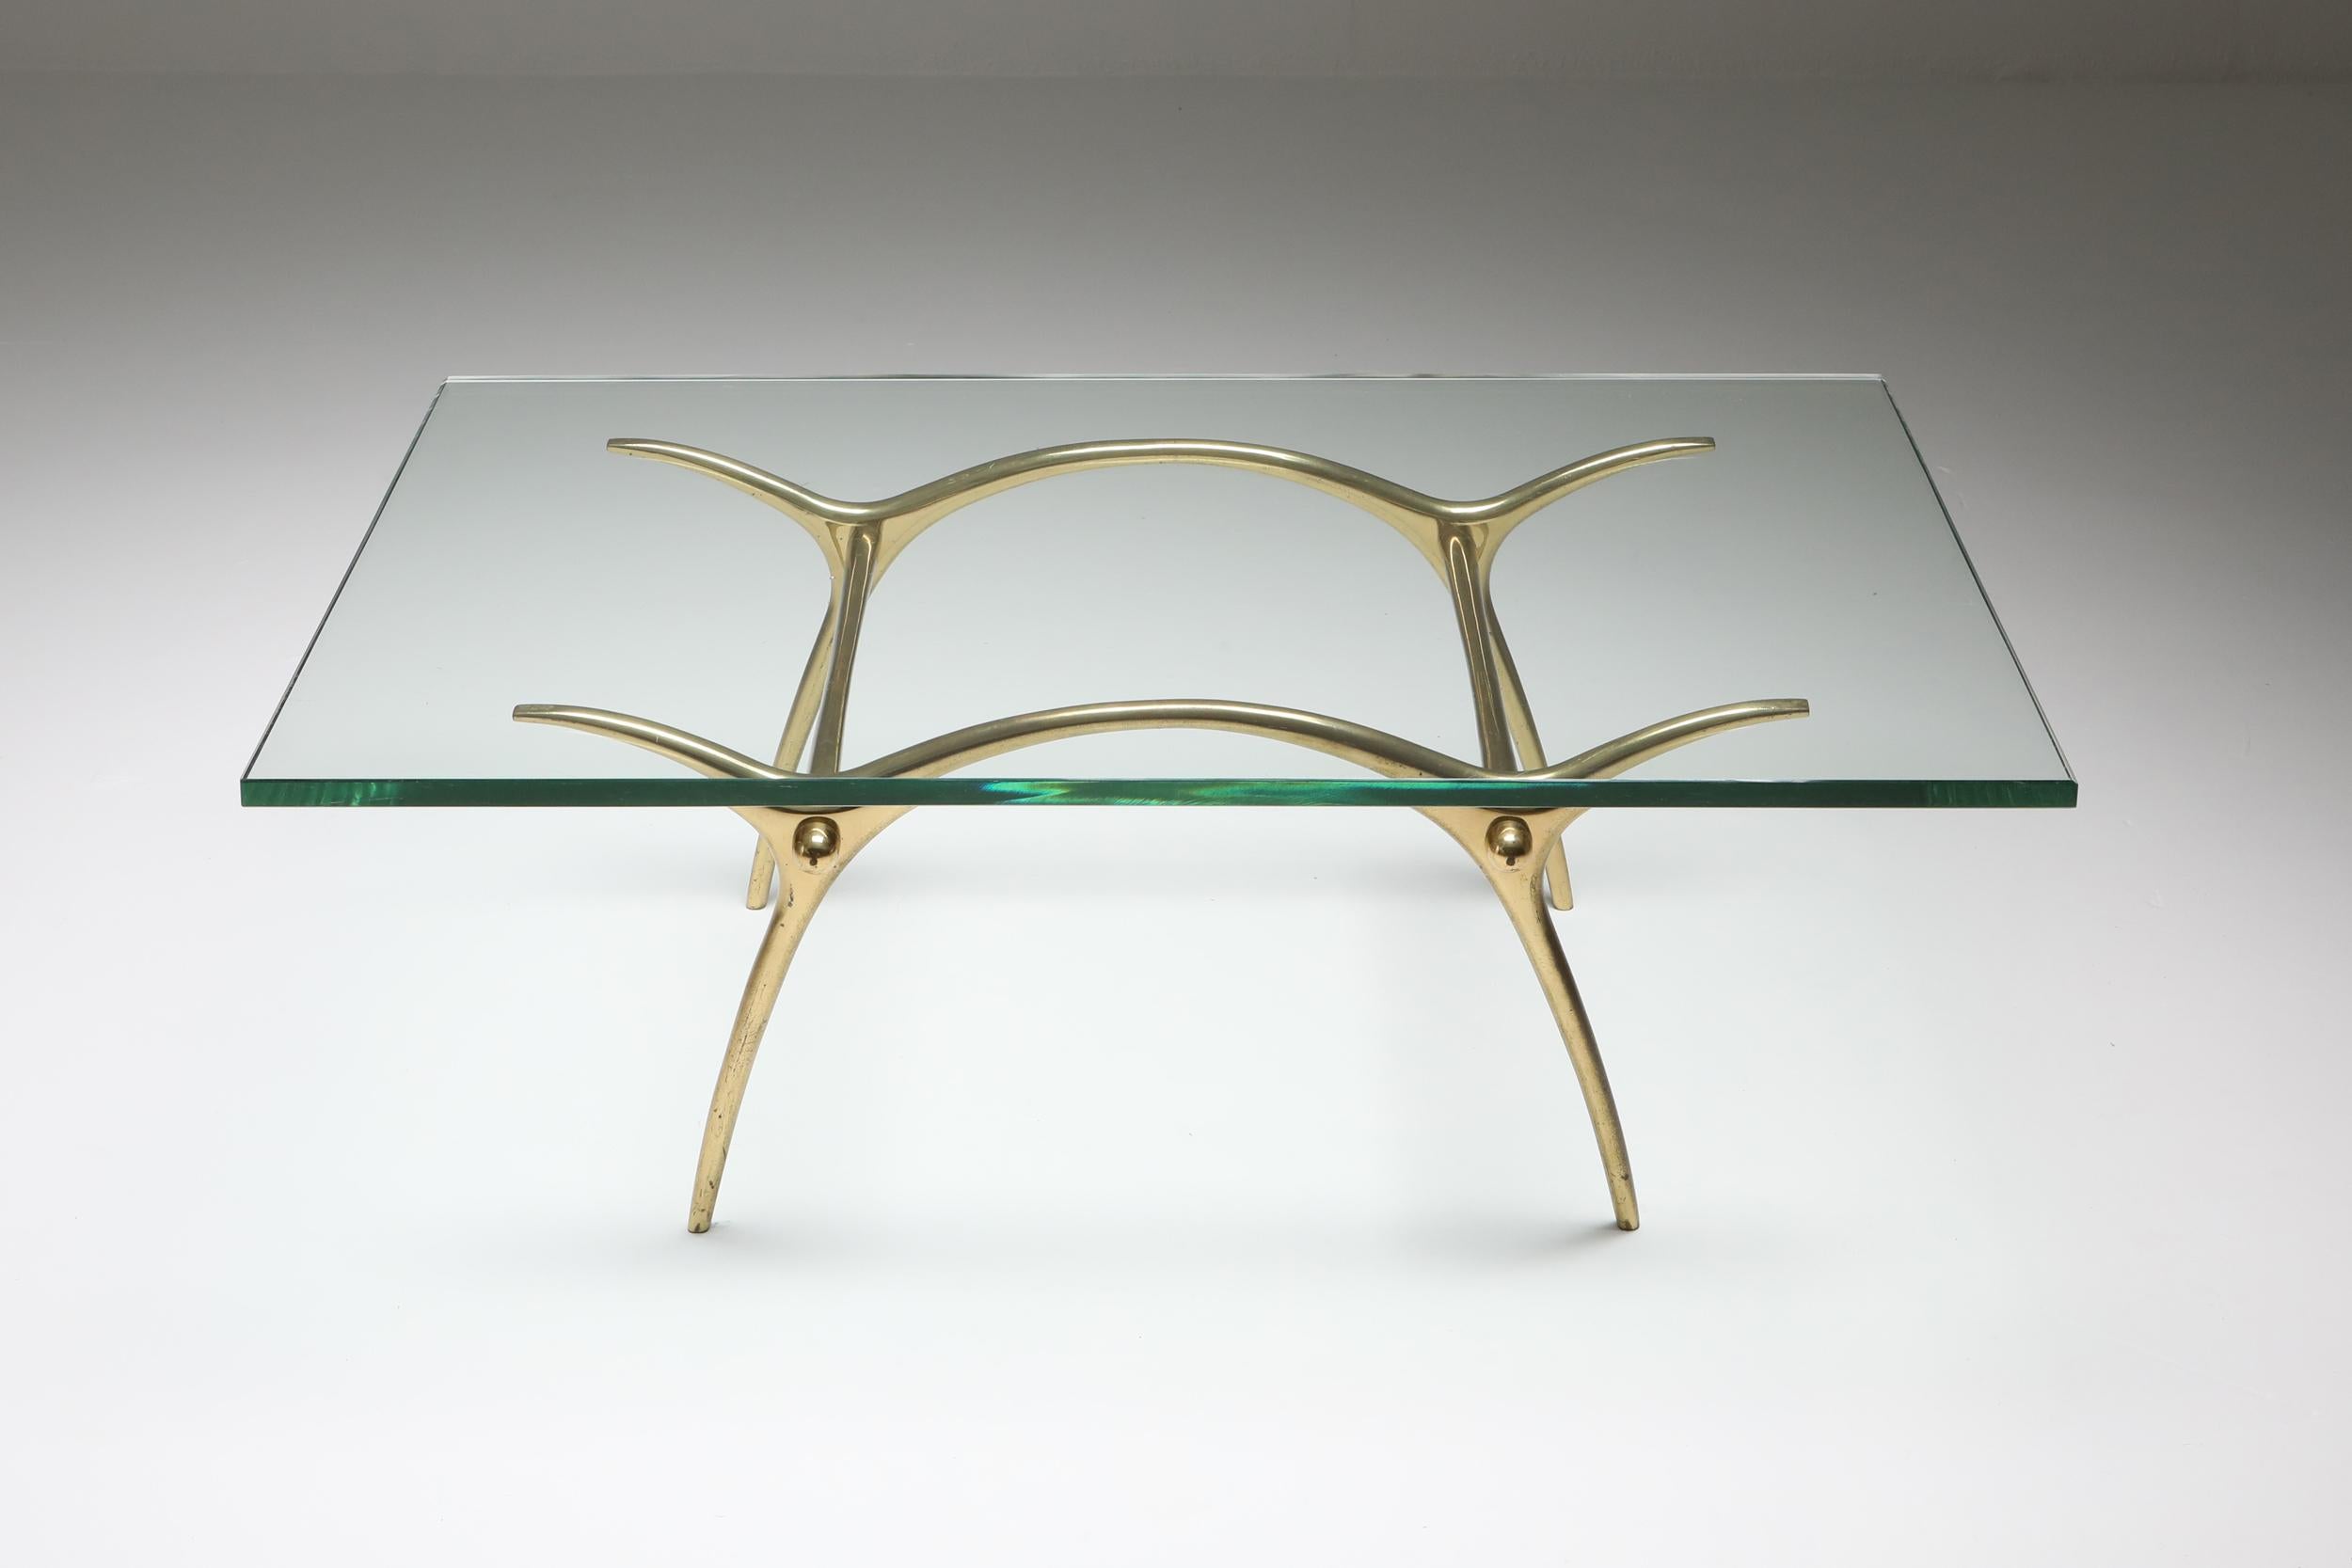 Kouloufi cocktail table, polished bronze, Belgium 1970s

the base is composed of double arches which are connected to each other via two stretchers.
The base supports a thick clear glass top.
By Kouloufi, Belgium, circa 1970.
Measures: L 115